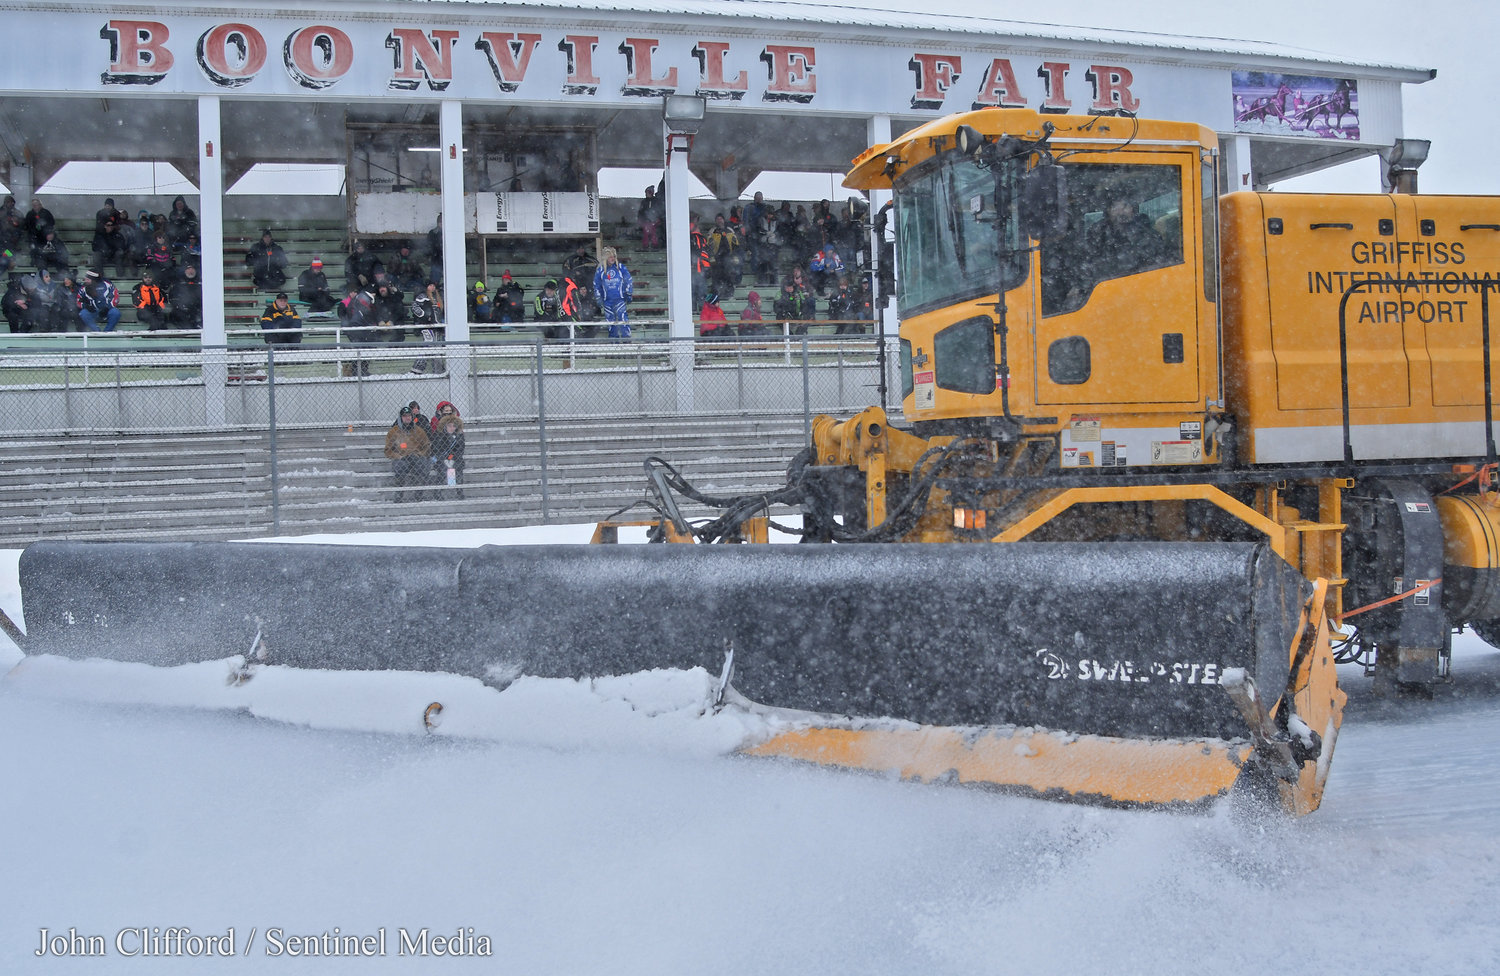 A Griffiss International Airport brush machine helped groom the track in between sets of heats and finals during the Snow Festival snowmobile racing Saturday and Sunday.